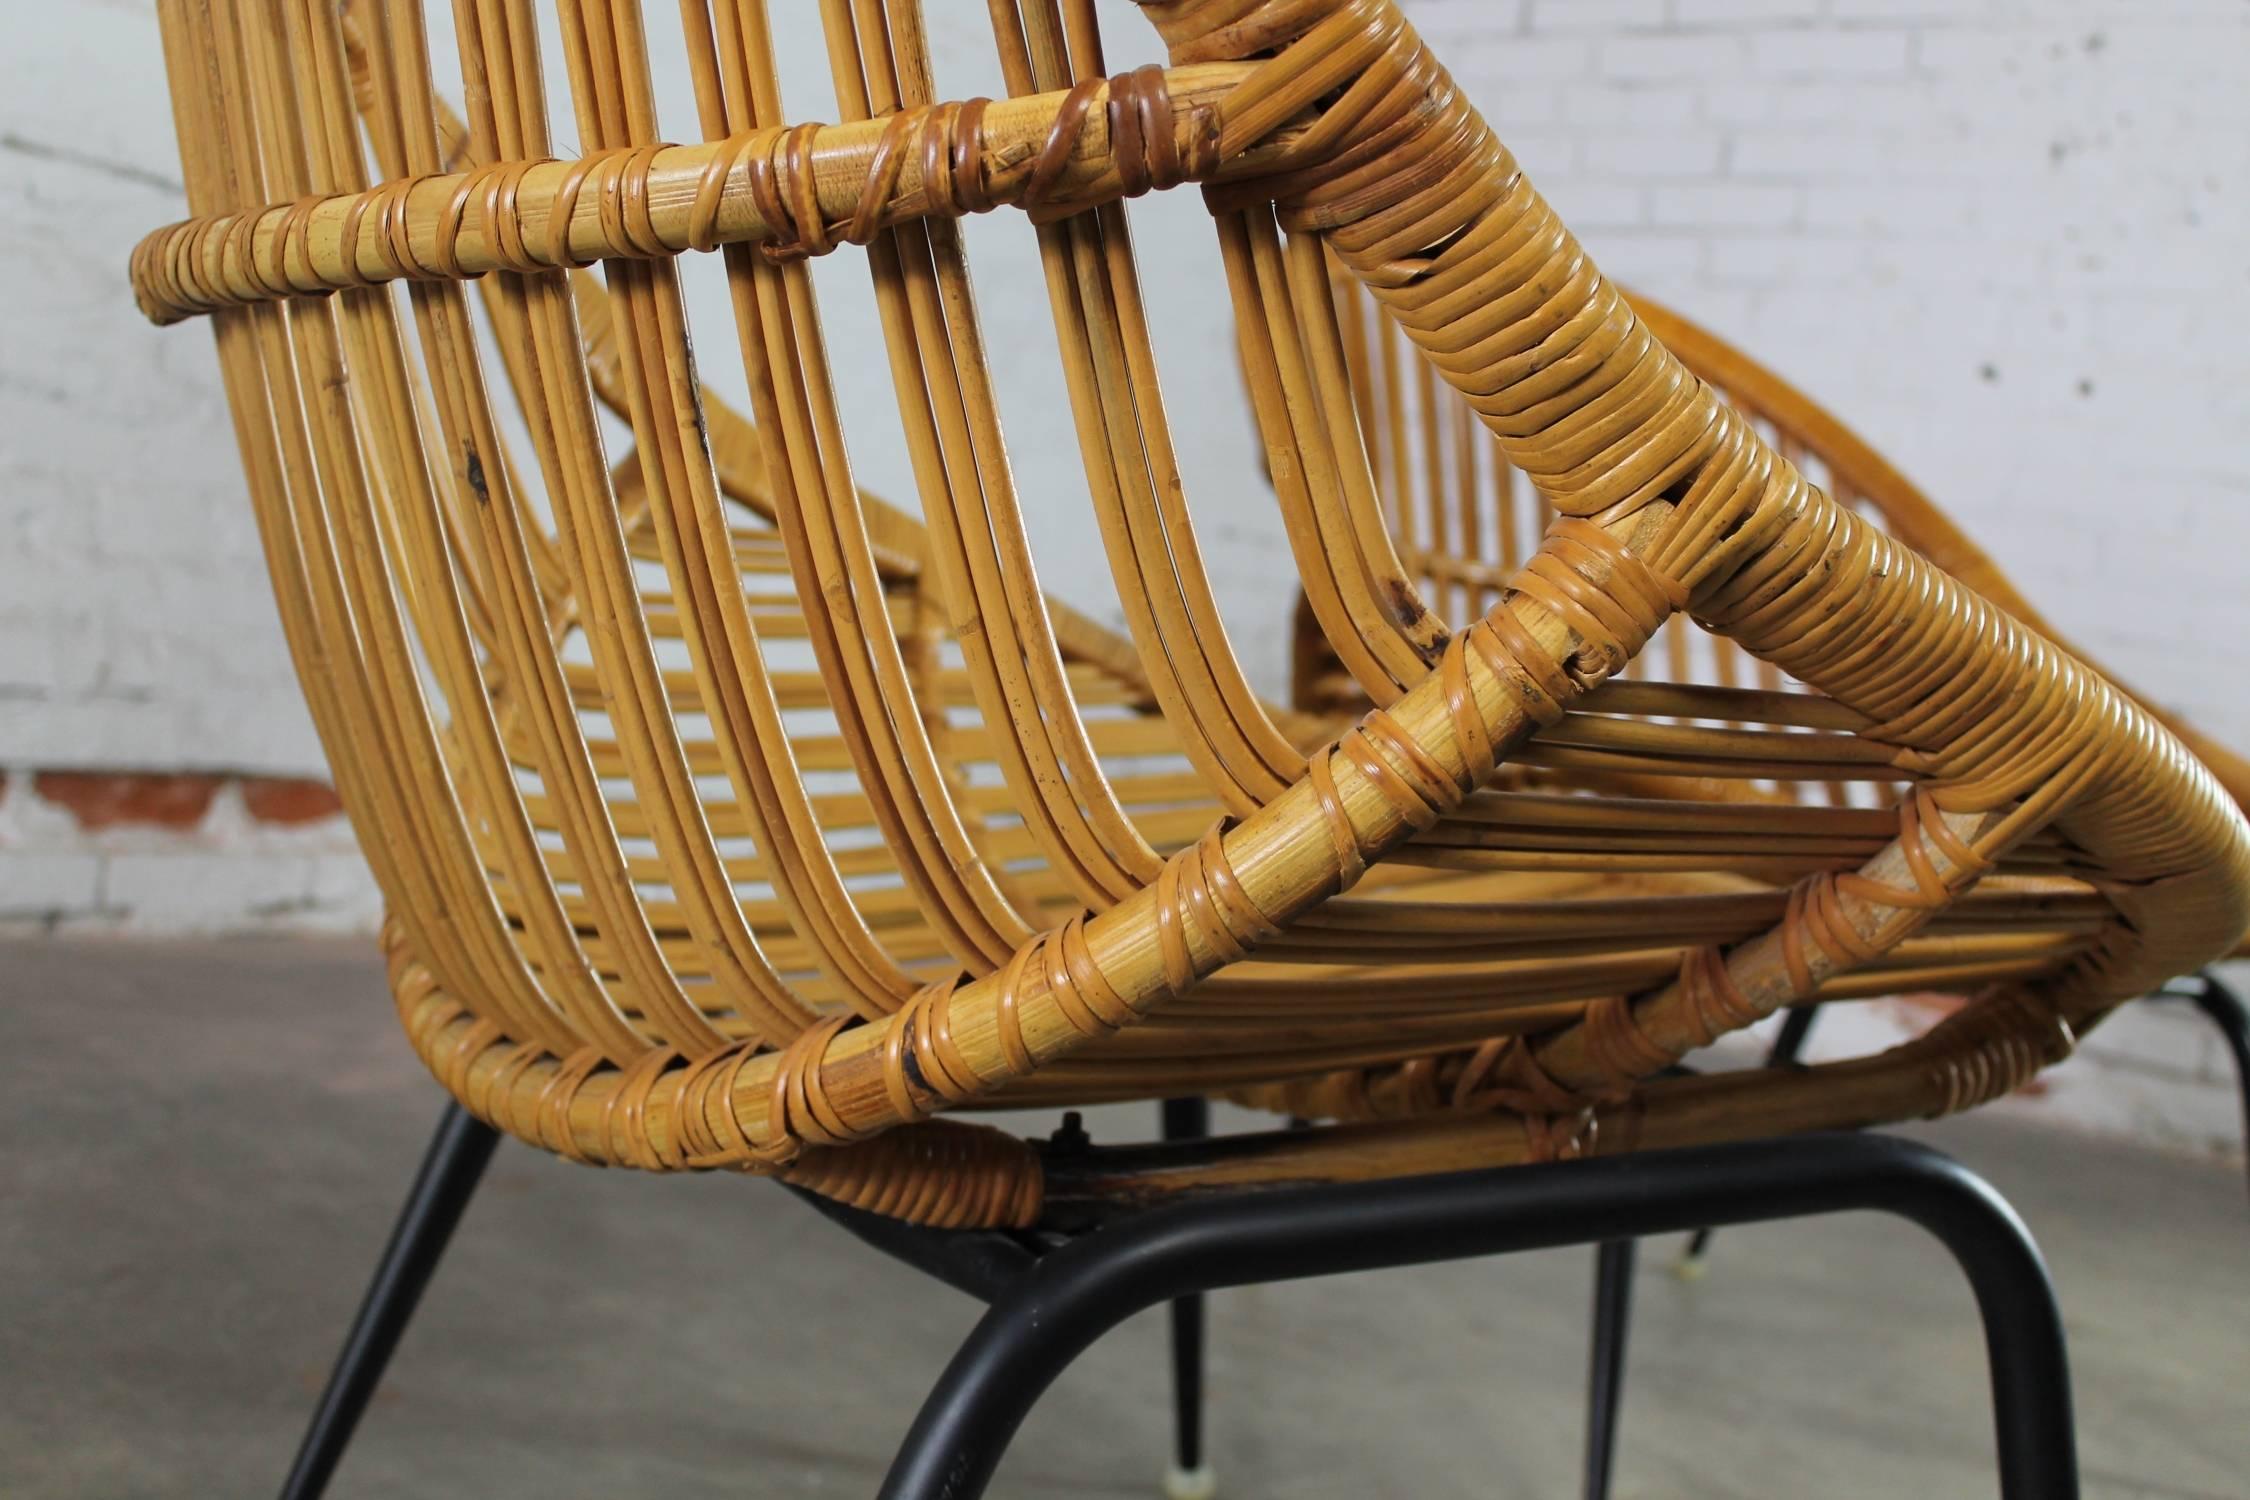 Painted Pair of Mid-Century Modern Rattan Wicker Basket Chairs by Troy Sunshade Company